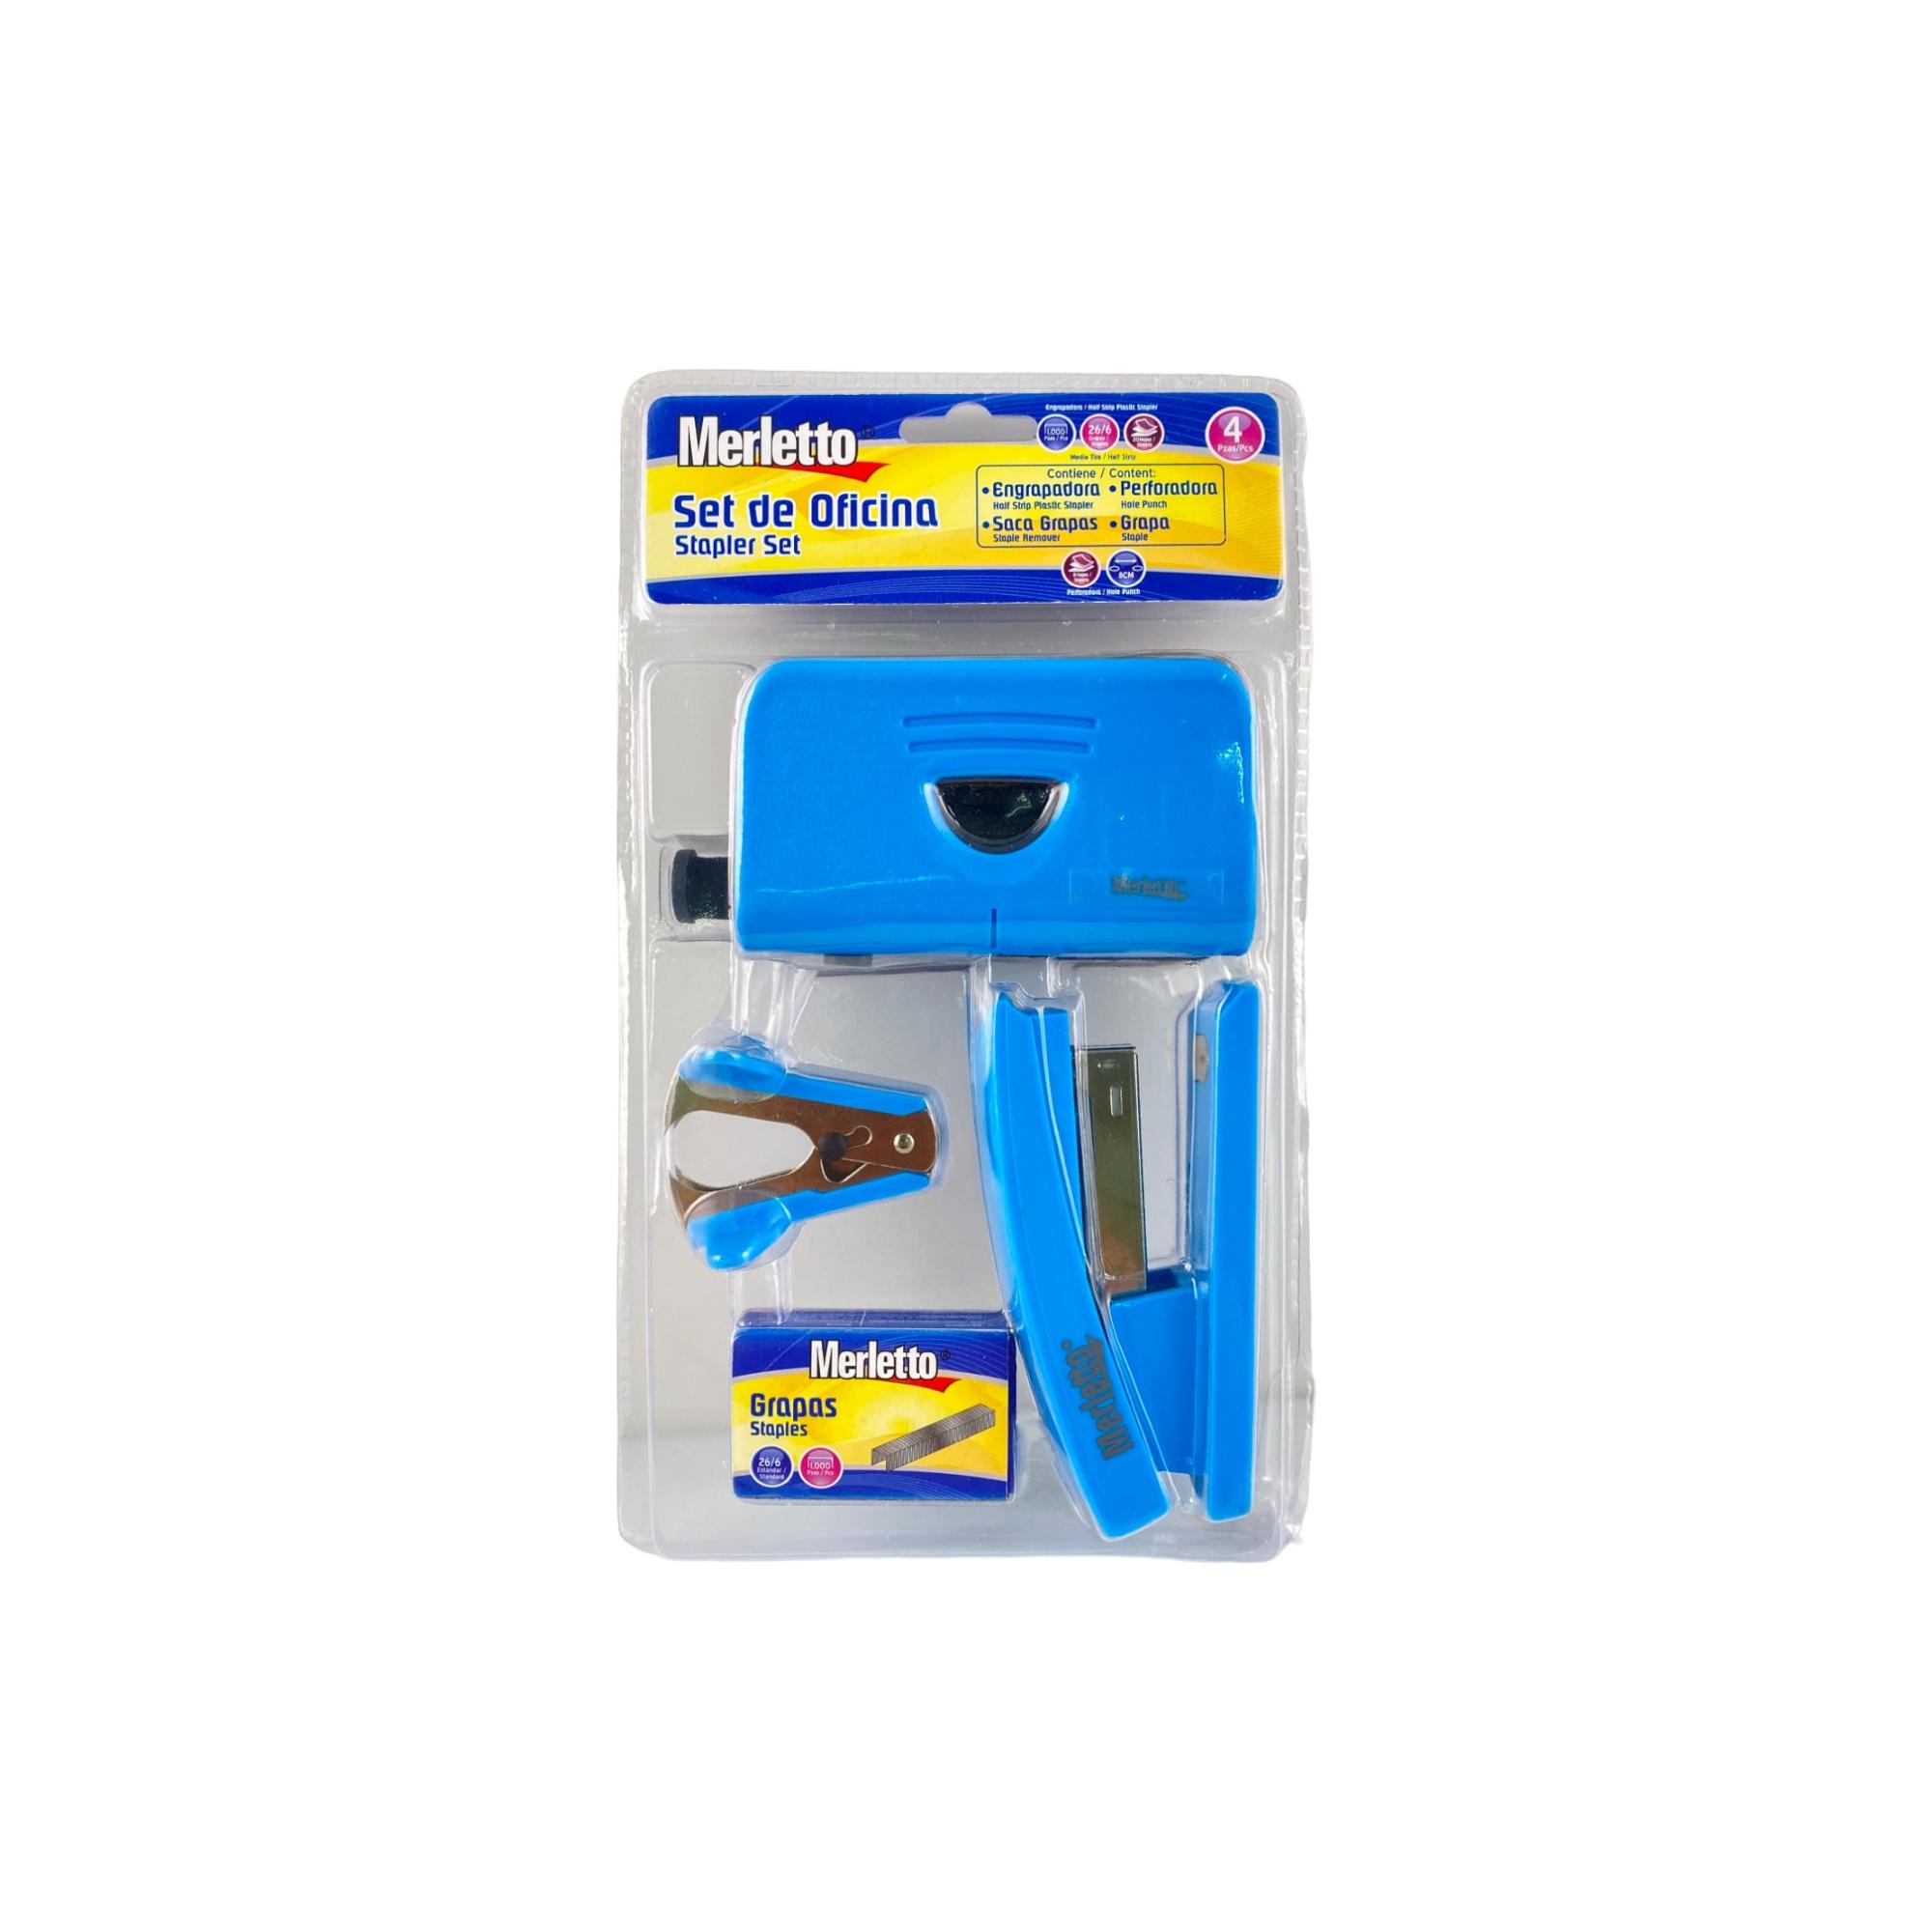 48 Pieces Hole Puncher - Hole Punchers - at 